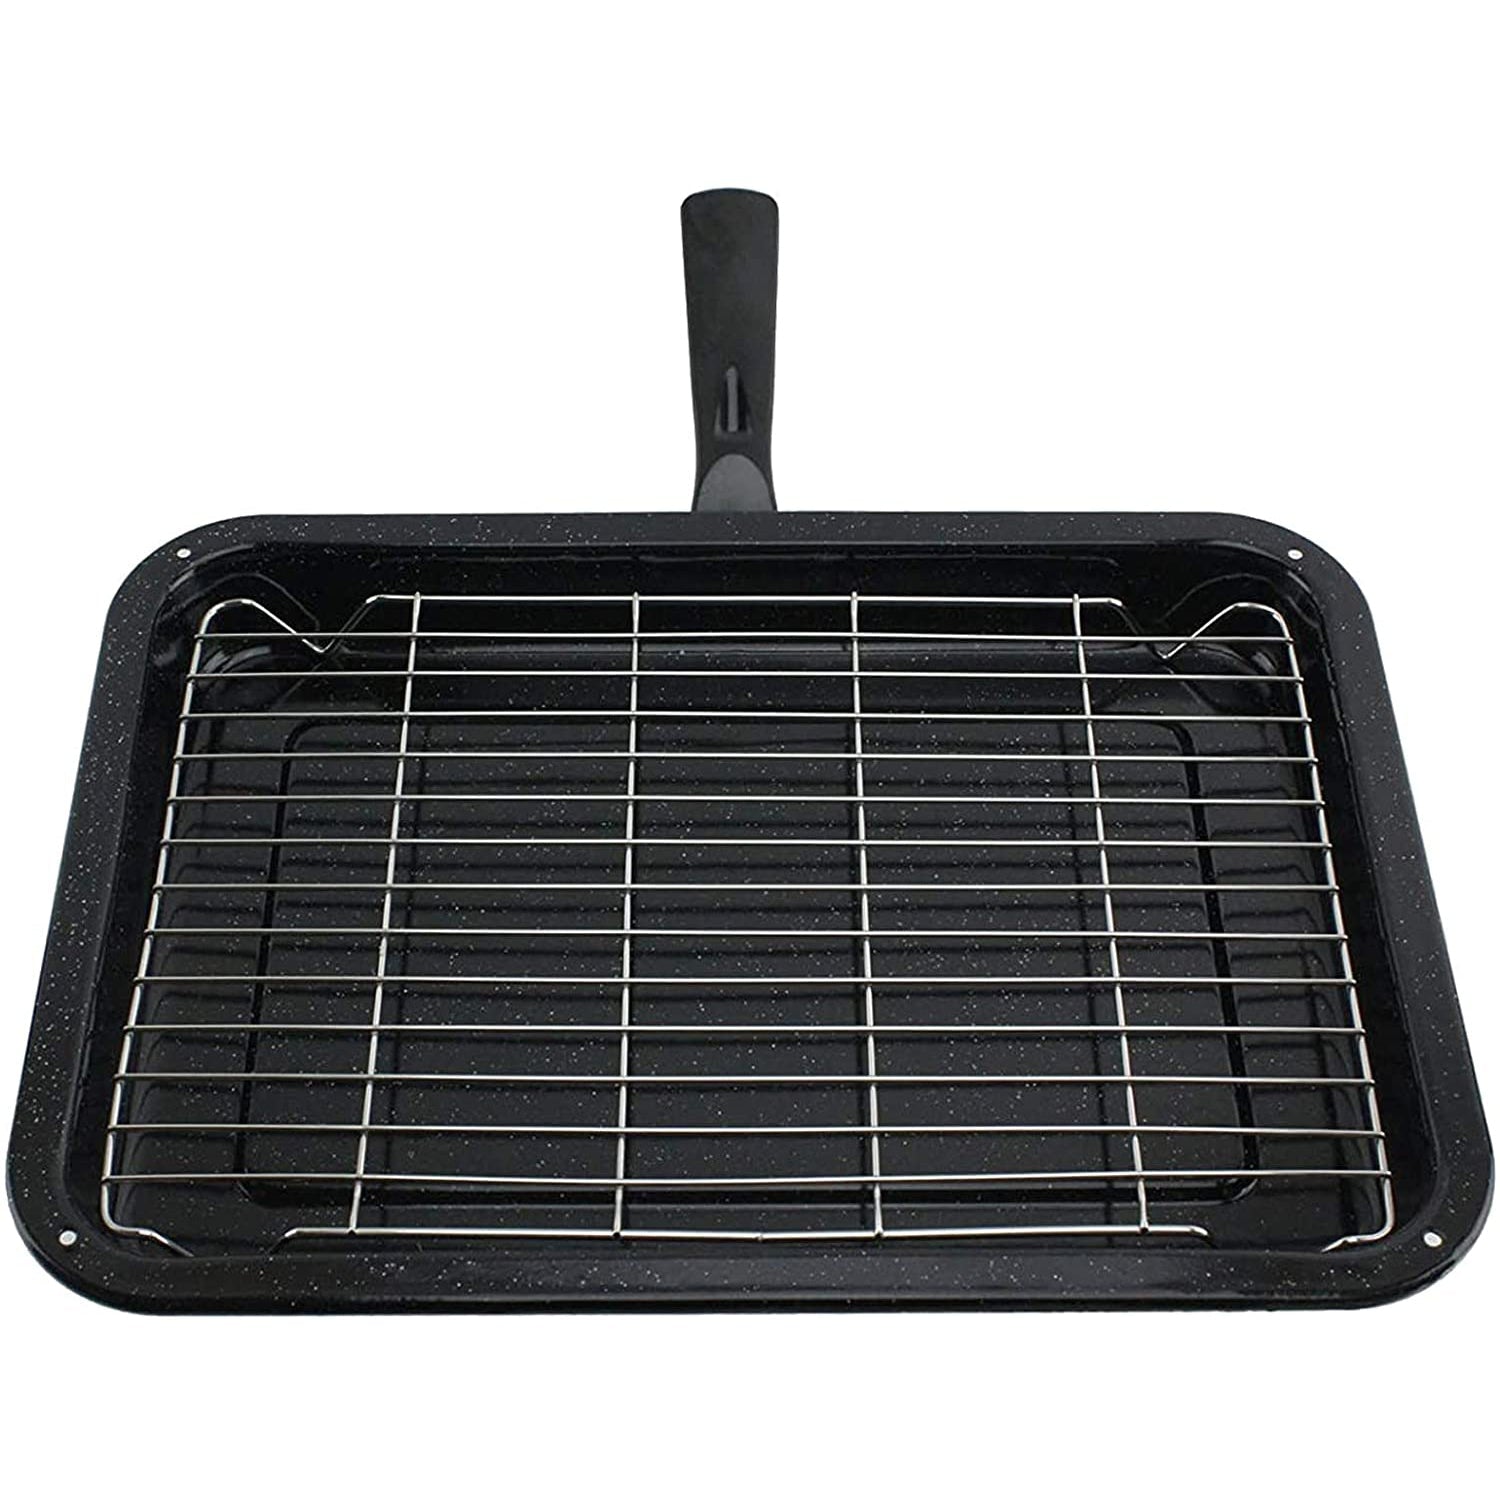 Small Grill Pan + Rack and Detachable Handle for BELLING Oven Cooker